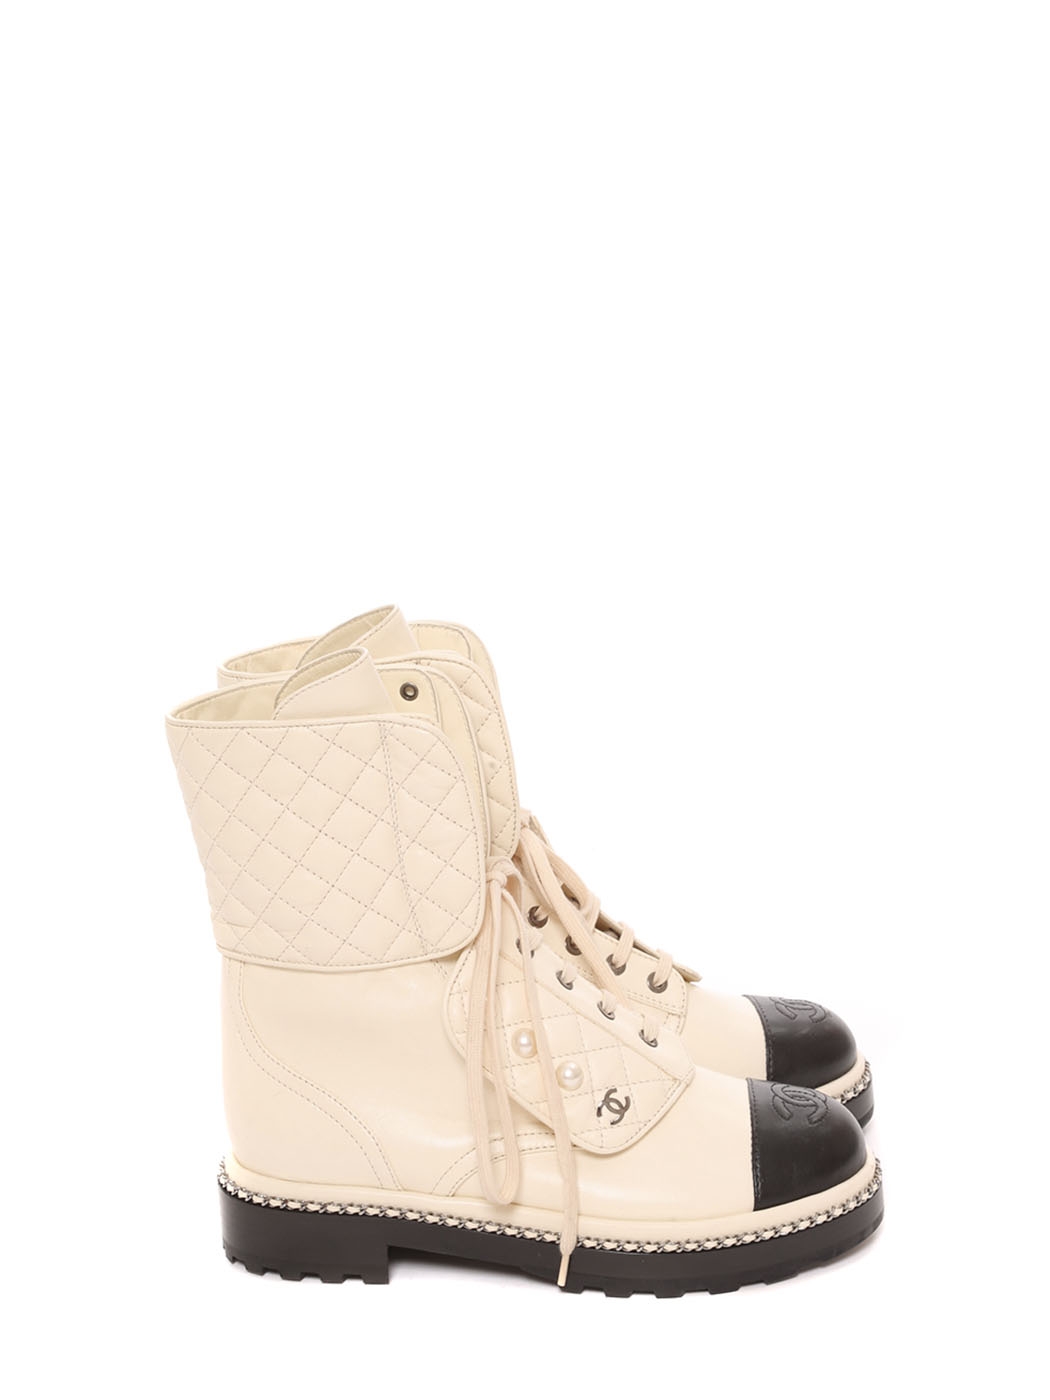 Boots trends These twotone Chanel boots are having a moment  Vogue France